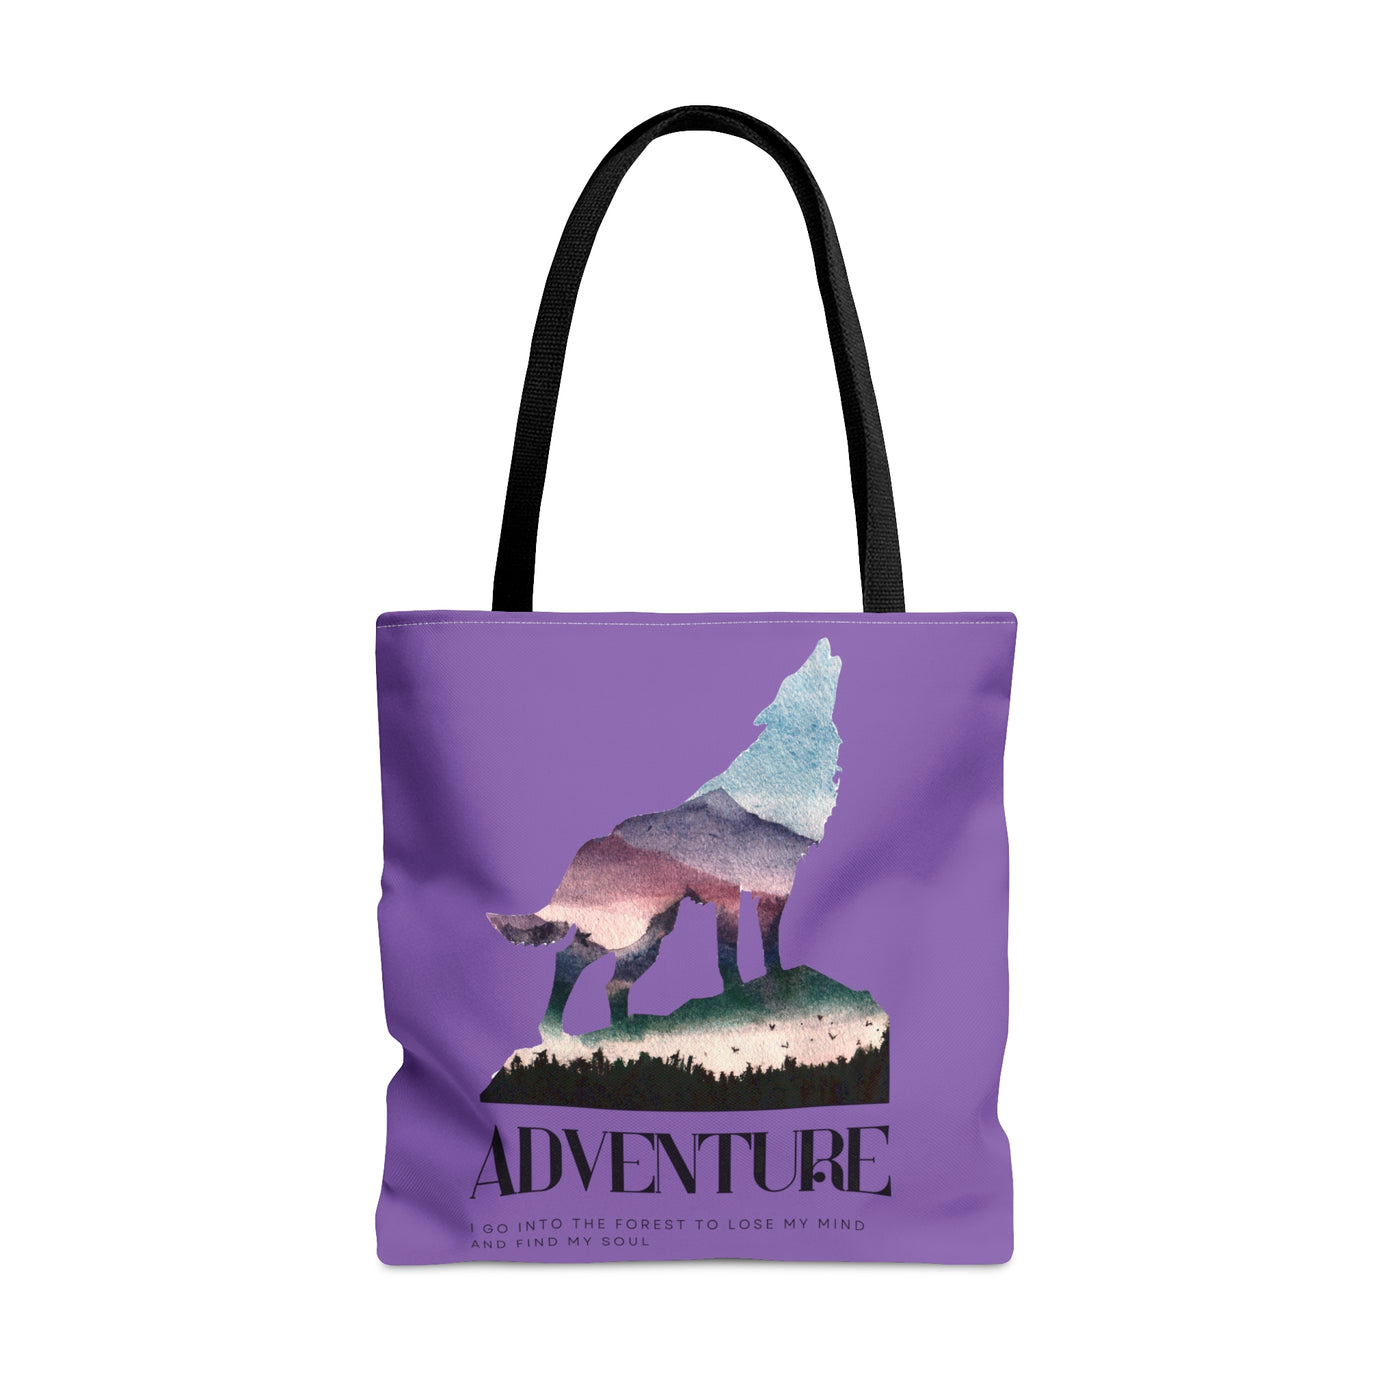 Reusable Tote Bags | Tote Shopping Bags | Let's Travel